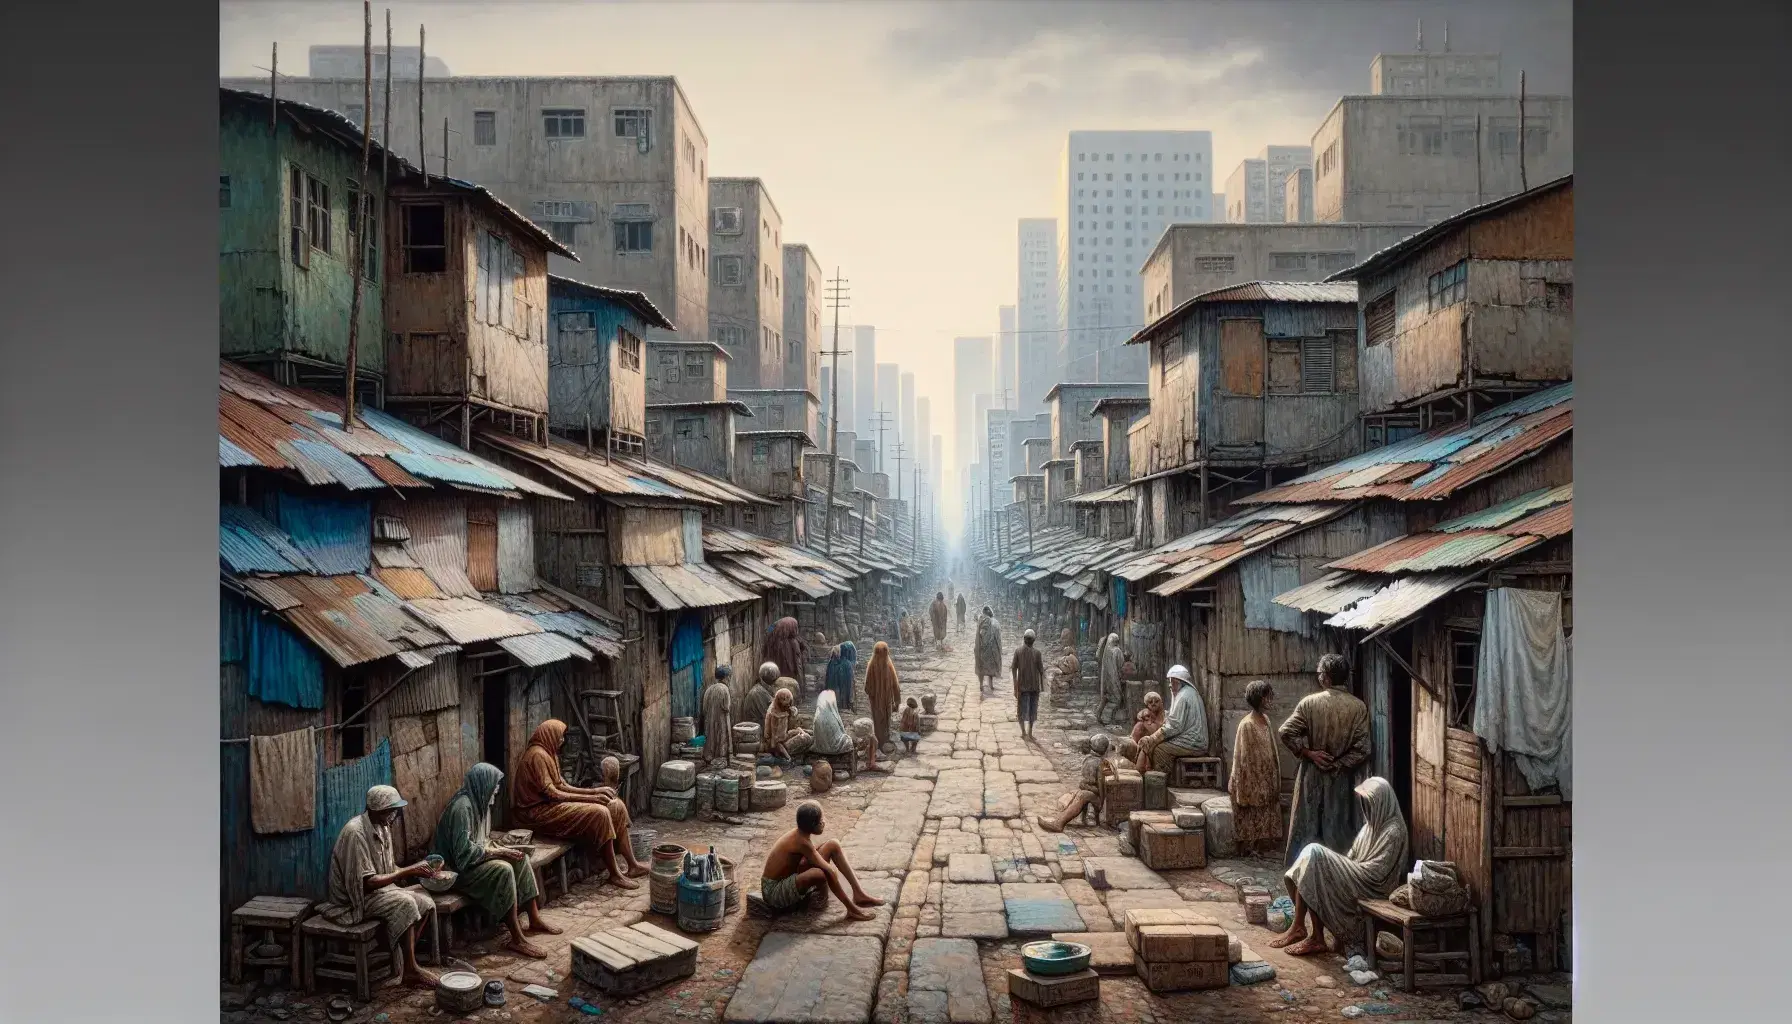 Aged urban scene with dirt road, metal and wooden shelters, people in used clothes and blurred skyscrapers in the background.